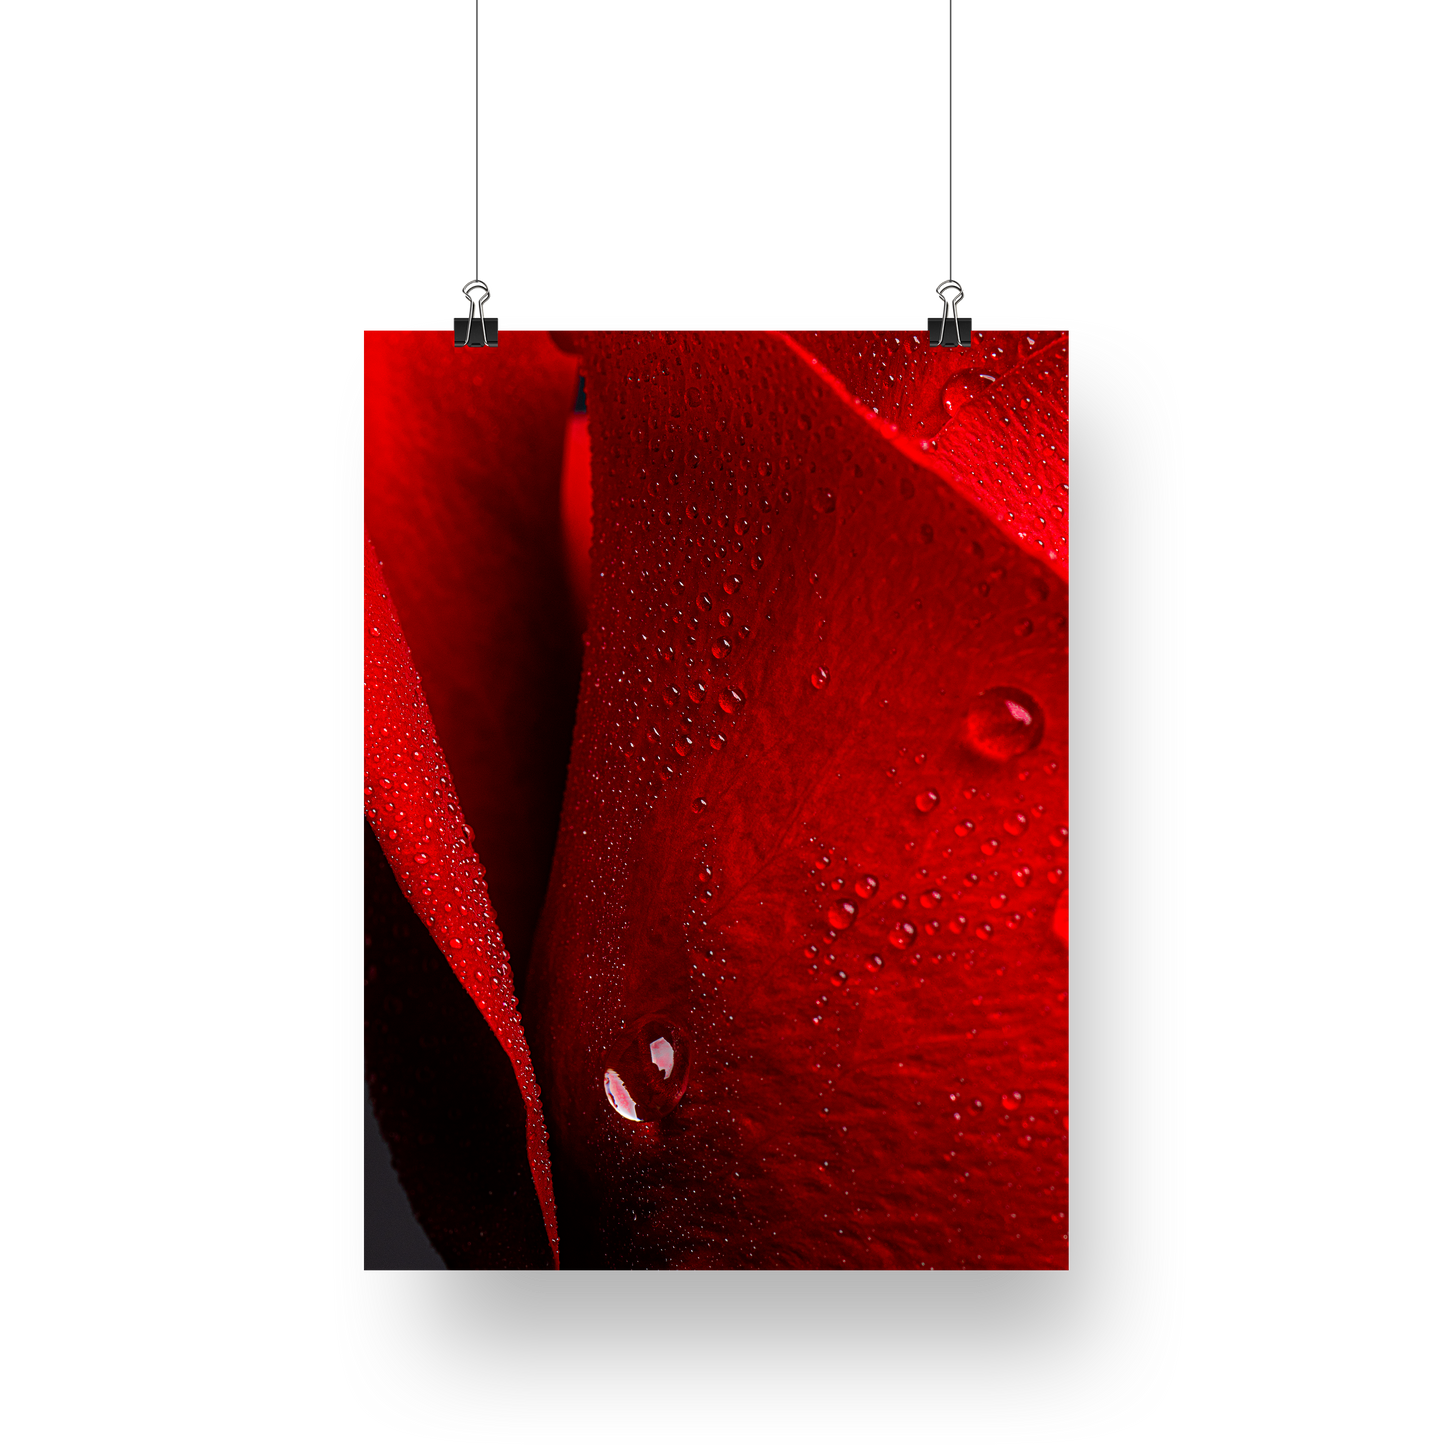 Exposed -  Still Life Photography Floral Fine Art - Wall Art Metal or Acrylic Print